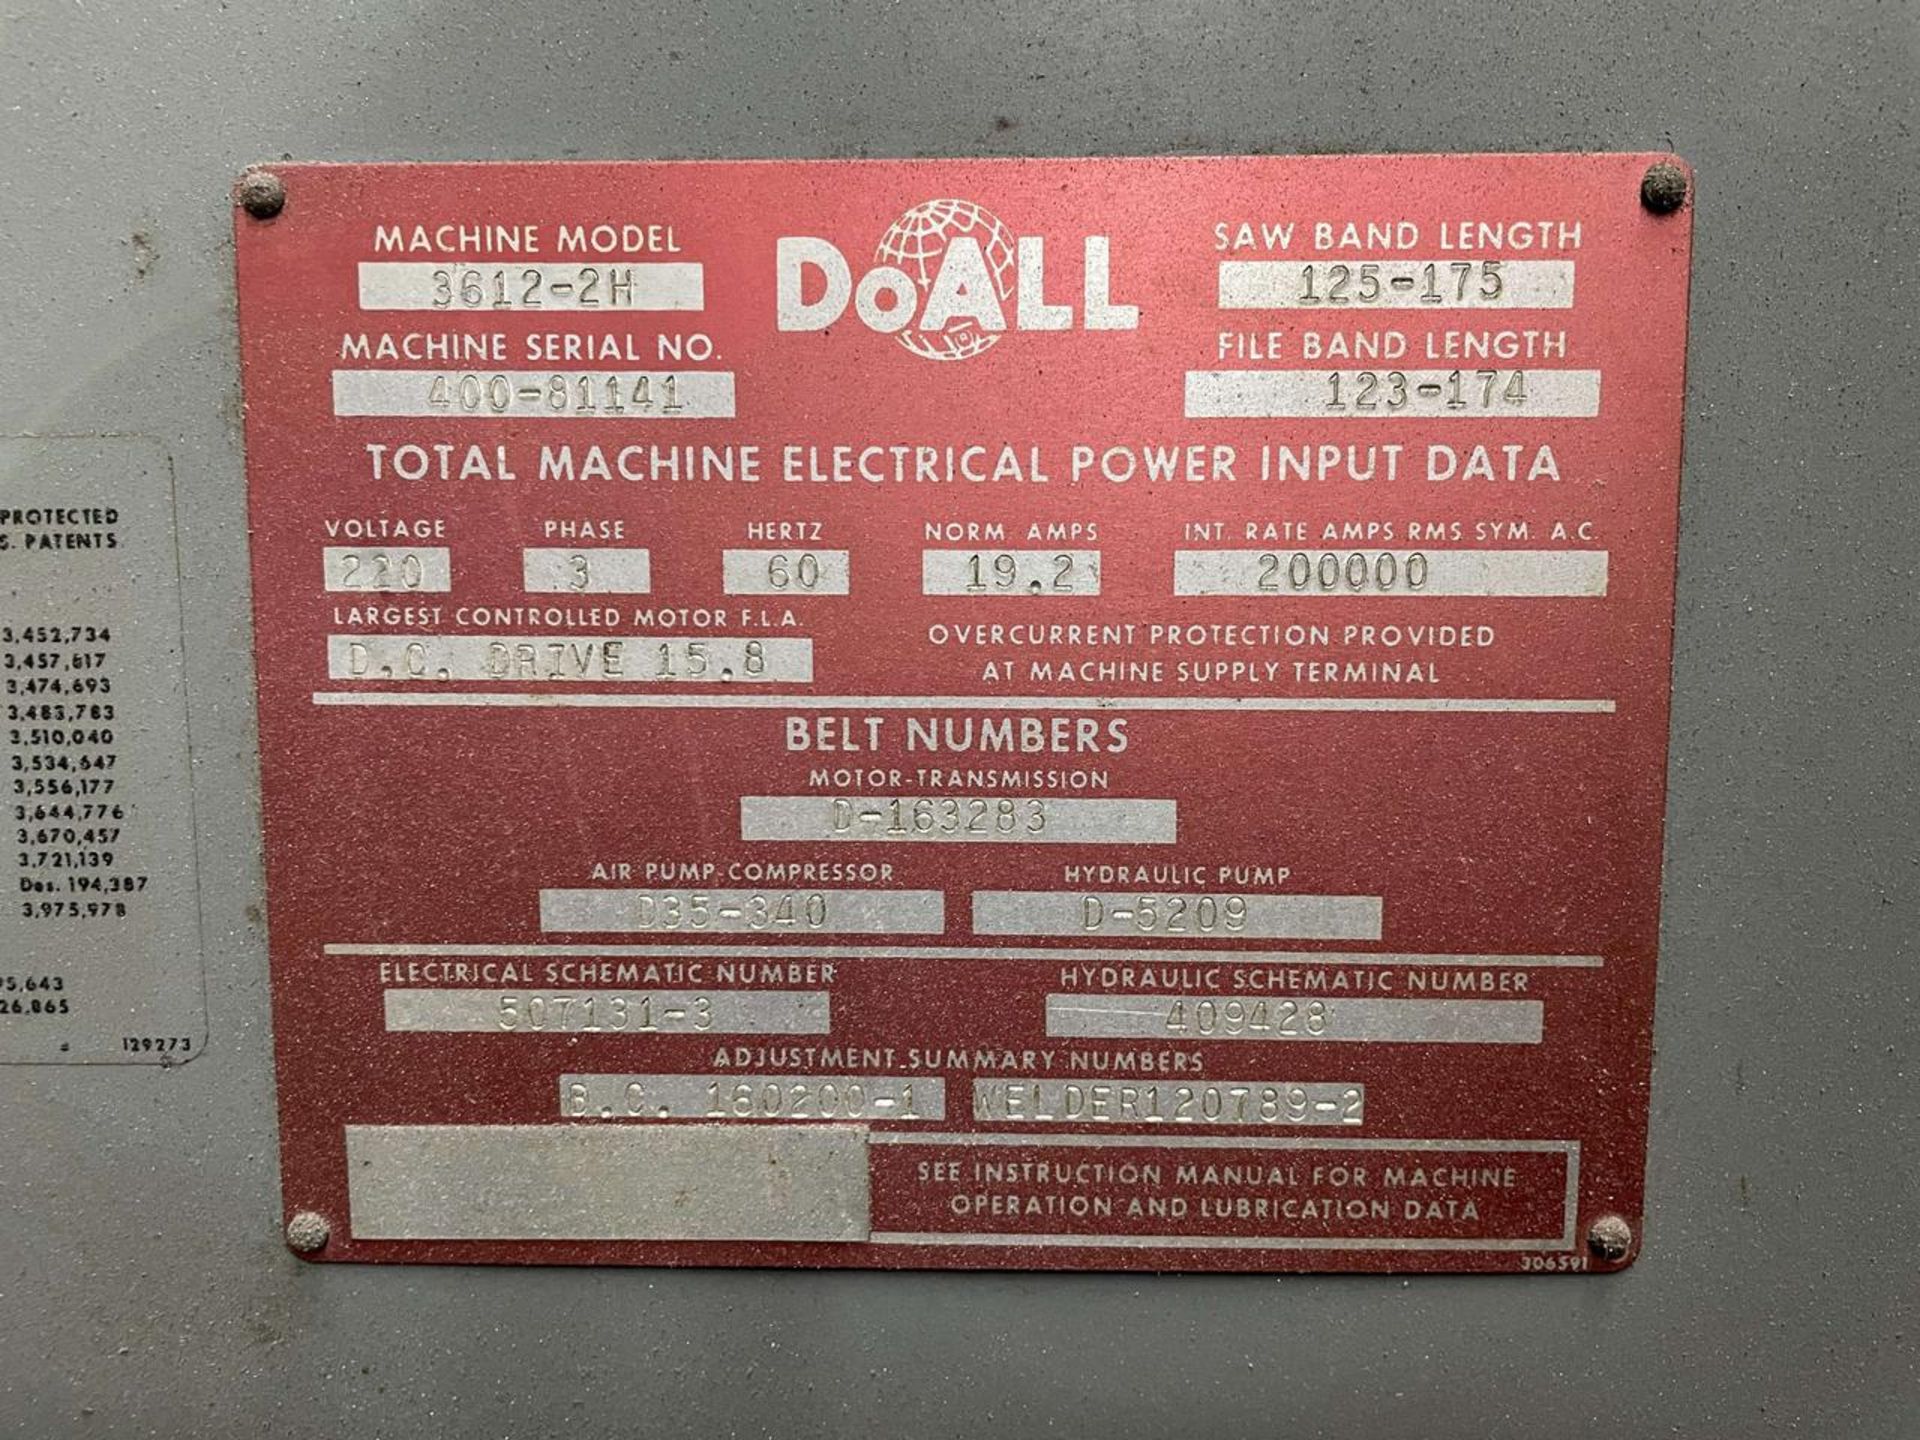 DoAll 36" Vertical Band Saw (Model 3612-2H) - Image 5 of 5